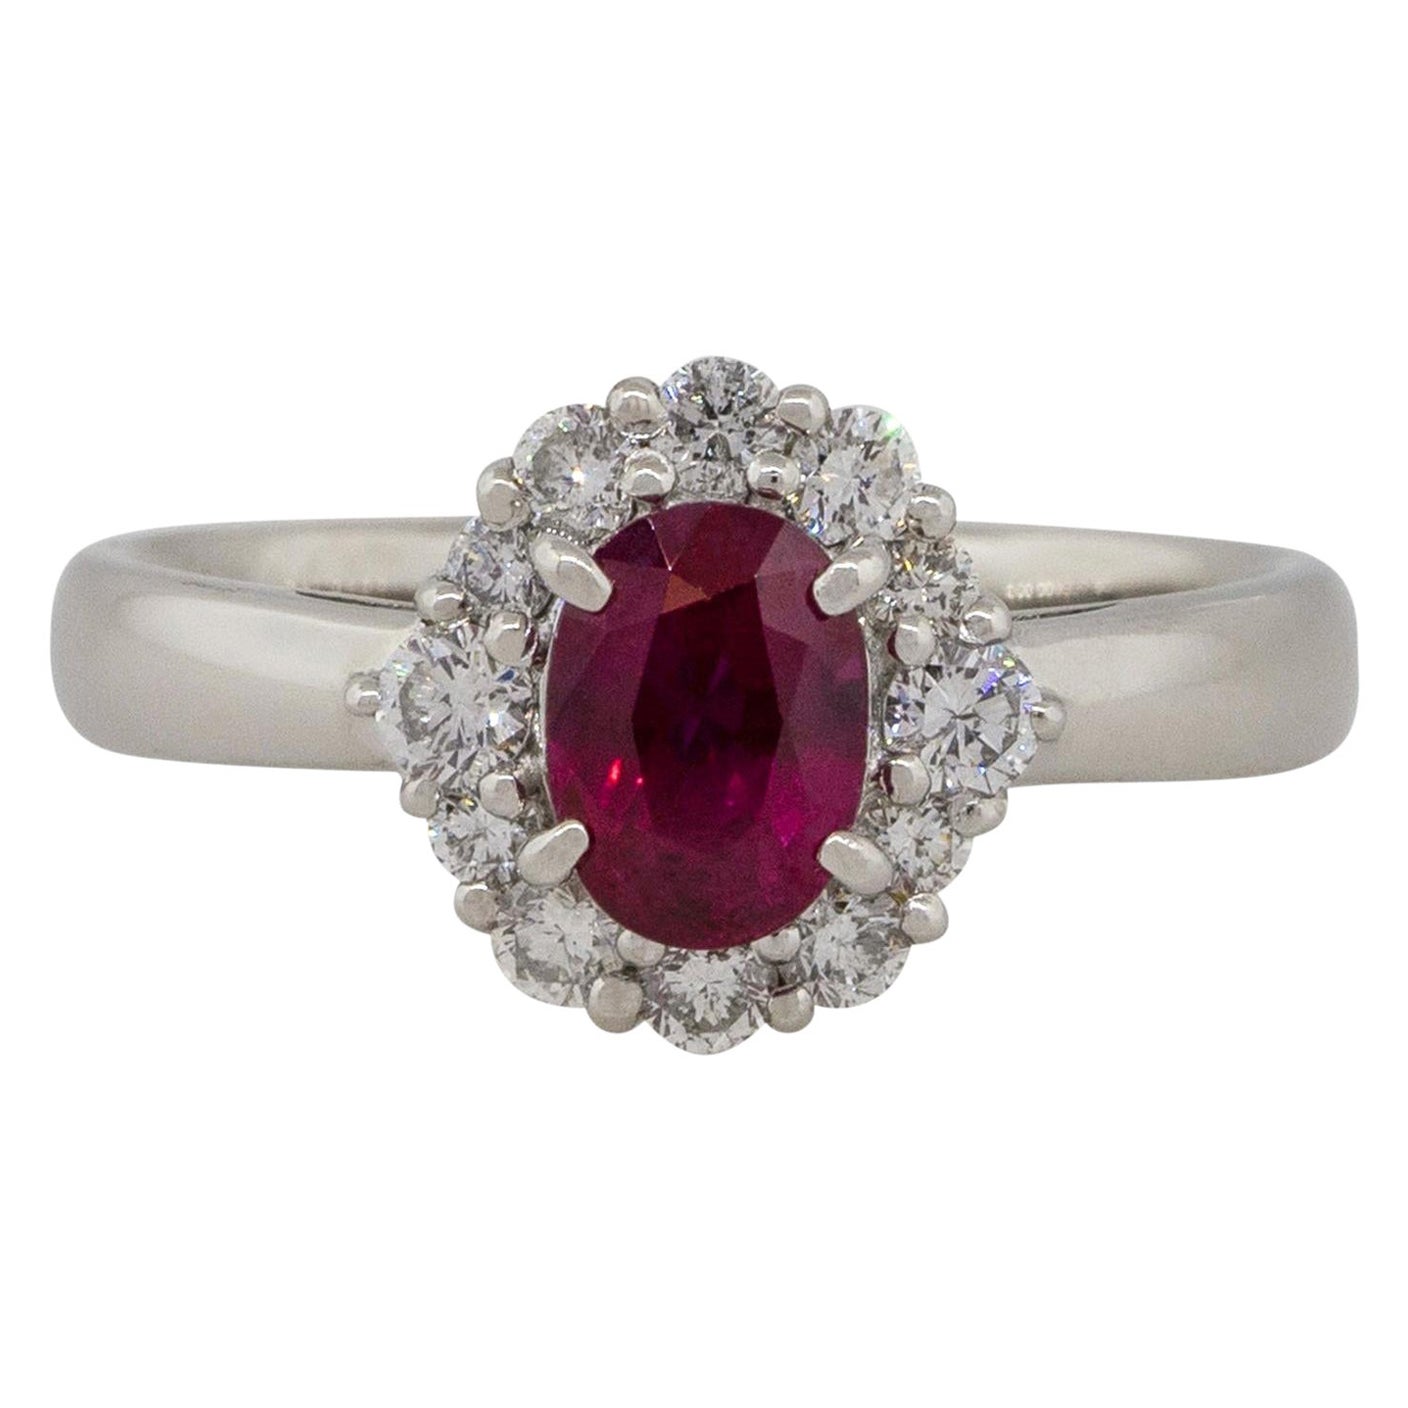 Panthere De Cartier 2.90 Carat Oval Sapphire, Diamond and Ruby Ring in ...